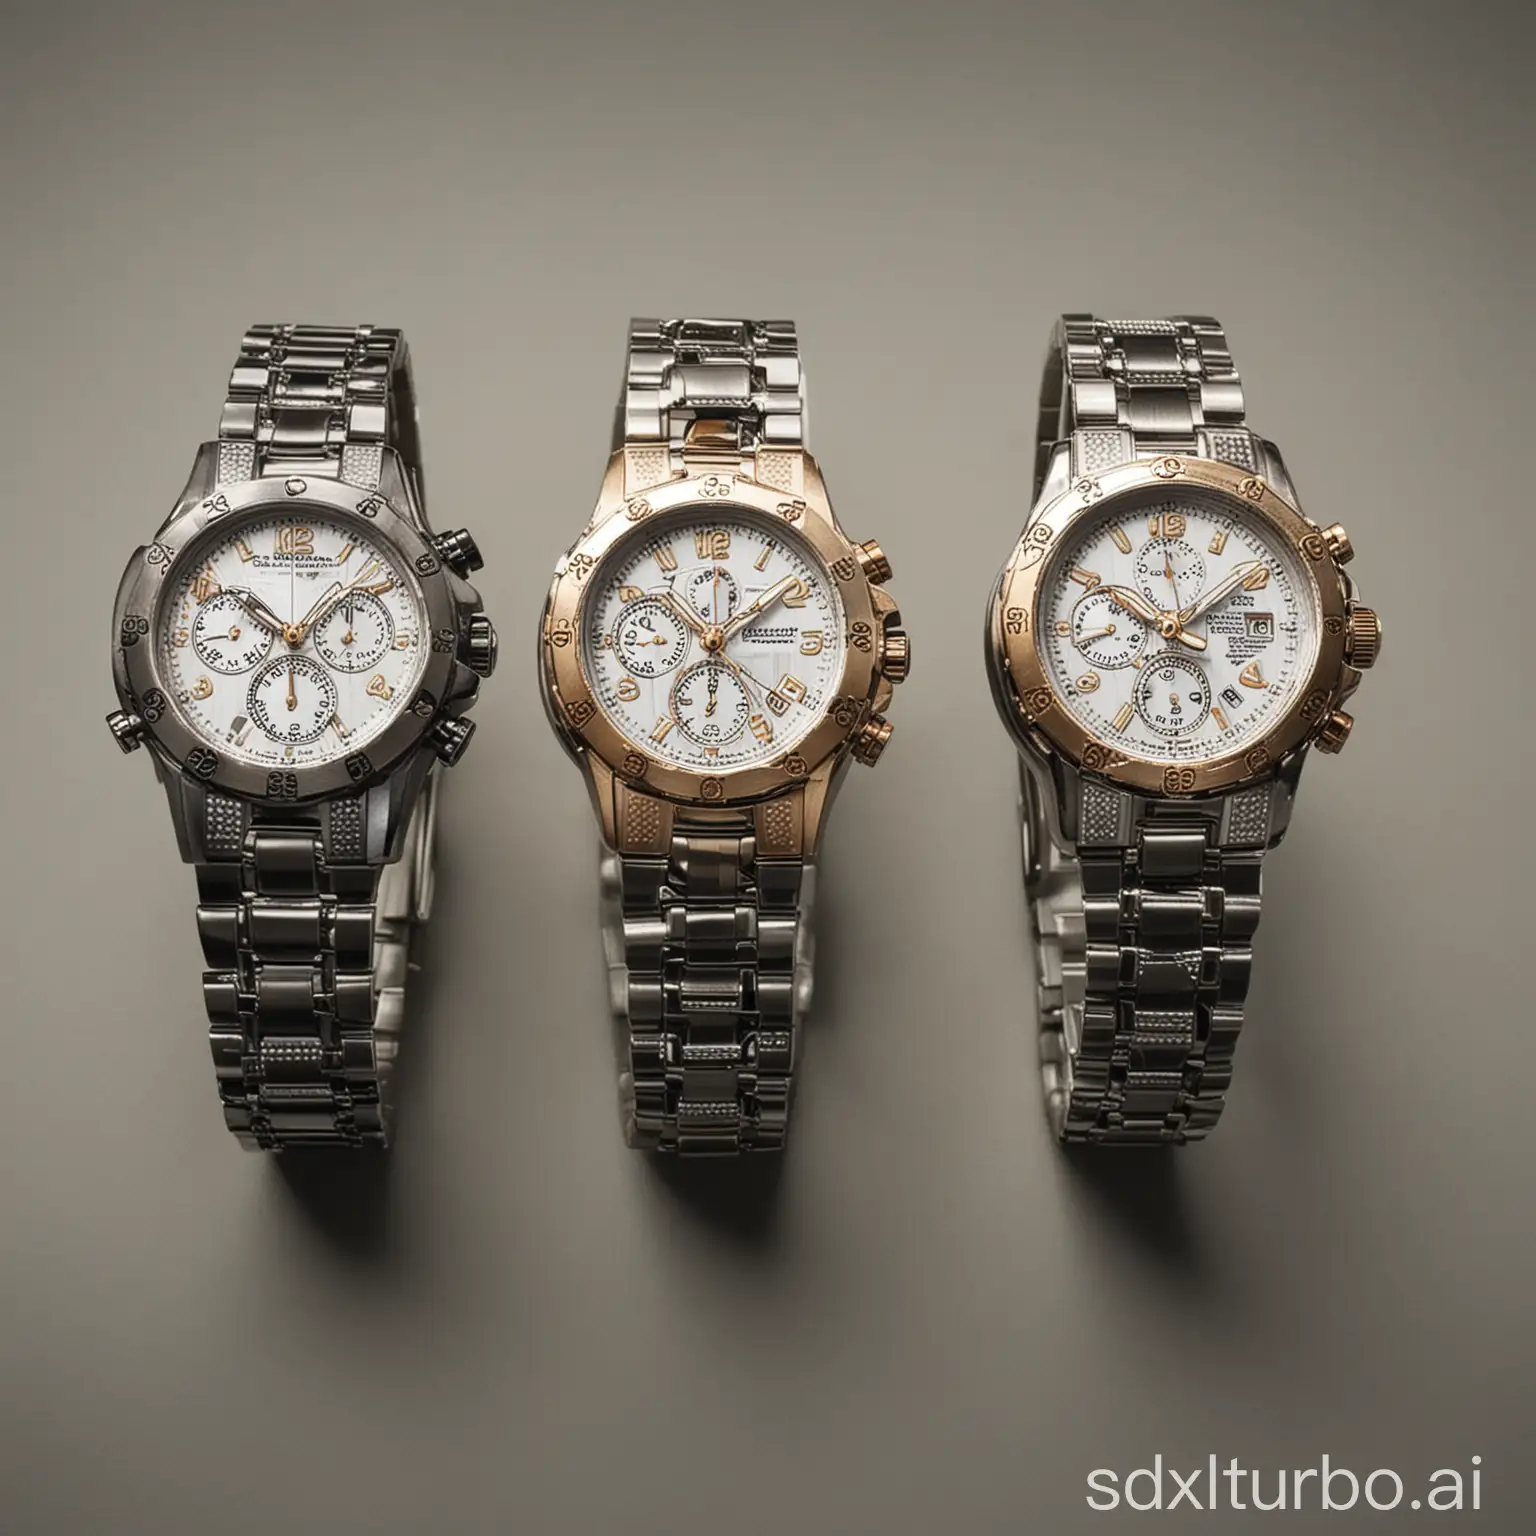 Two-Stylish-Wrist-Watches-Tysoty-Aligned-in-the-Center